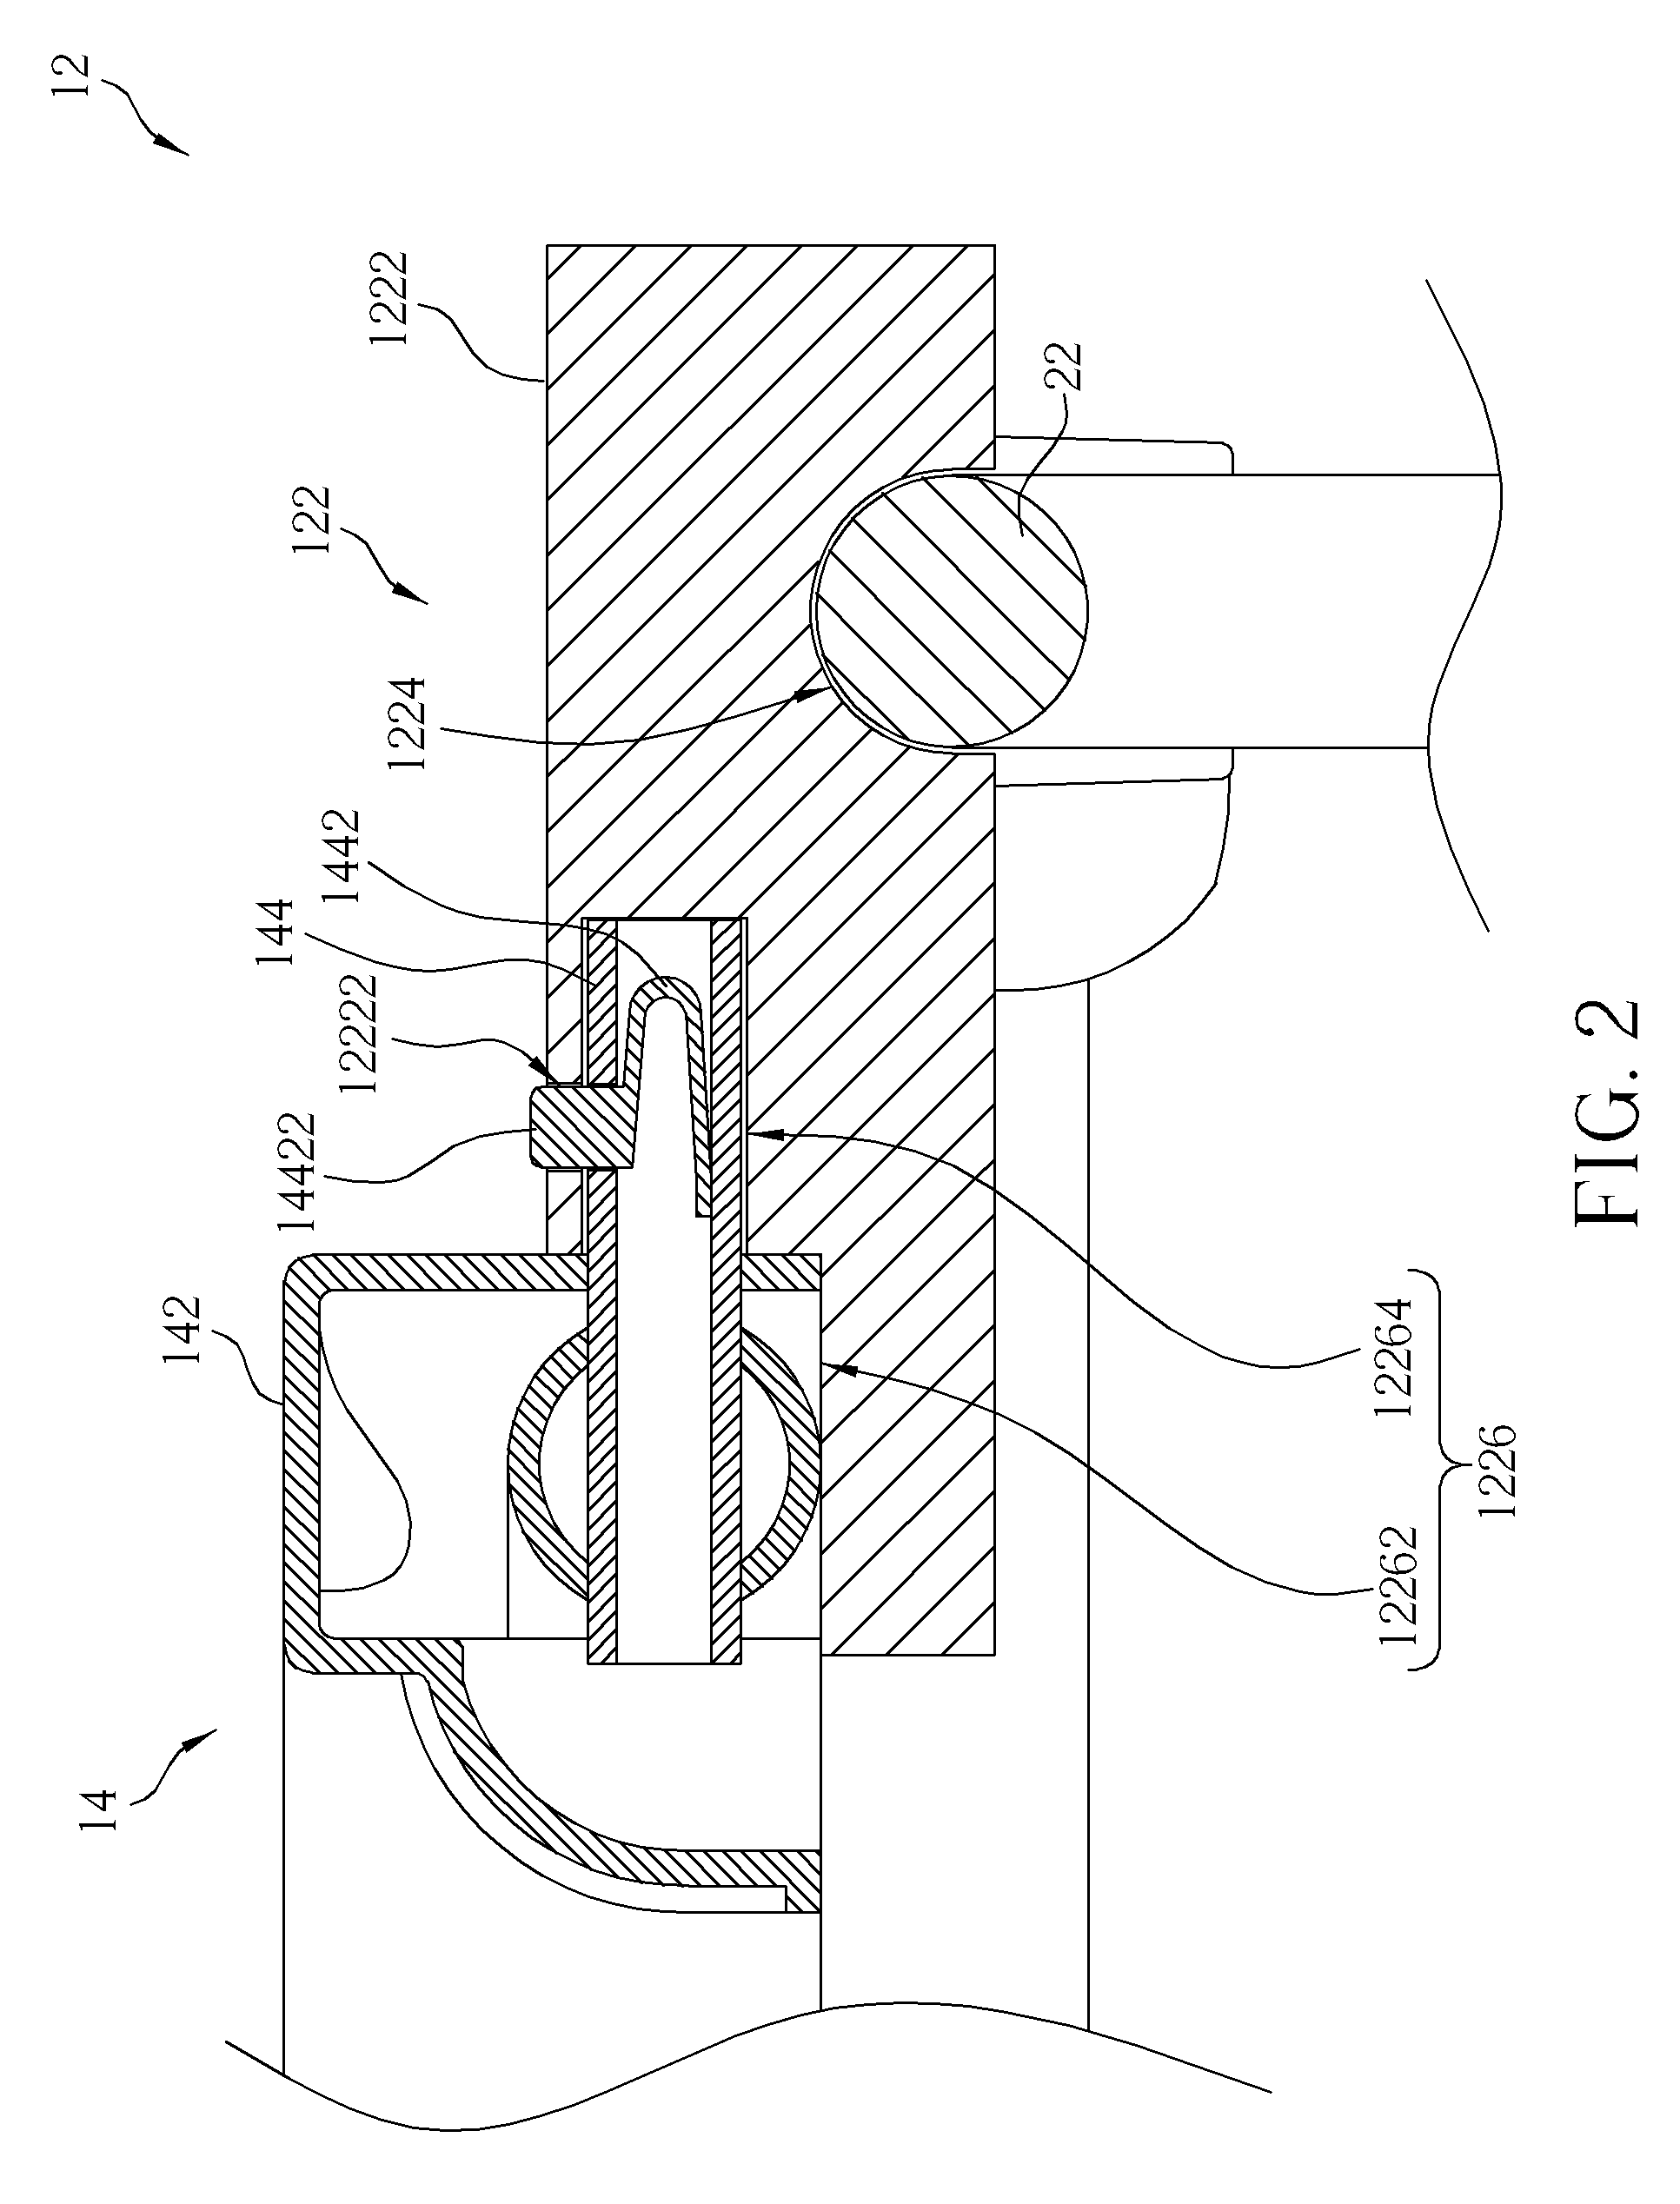 Infant-carrier docking station and crib therewith